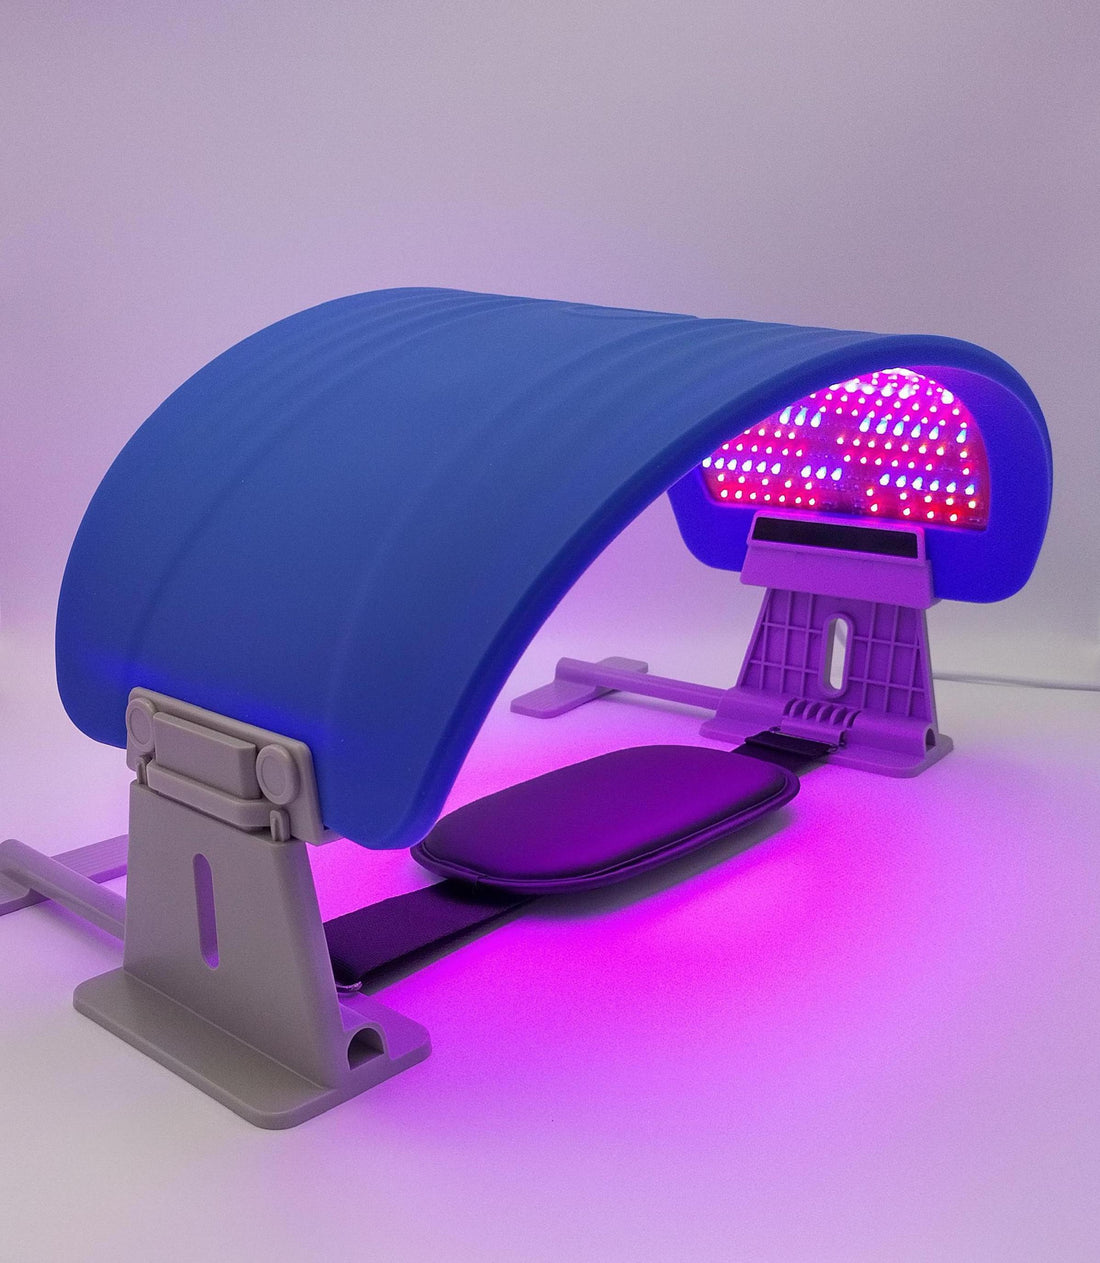 Three color light therapy device for skin care (blue, yellow, red LED lights)